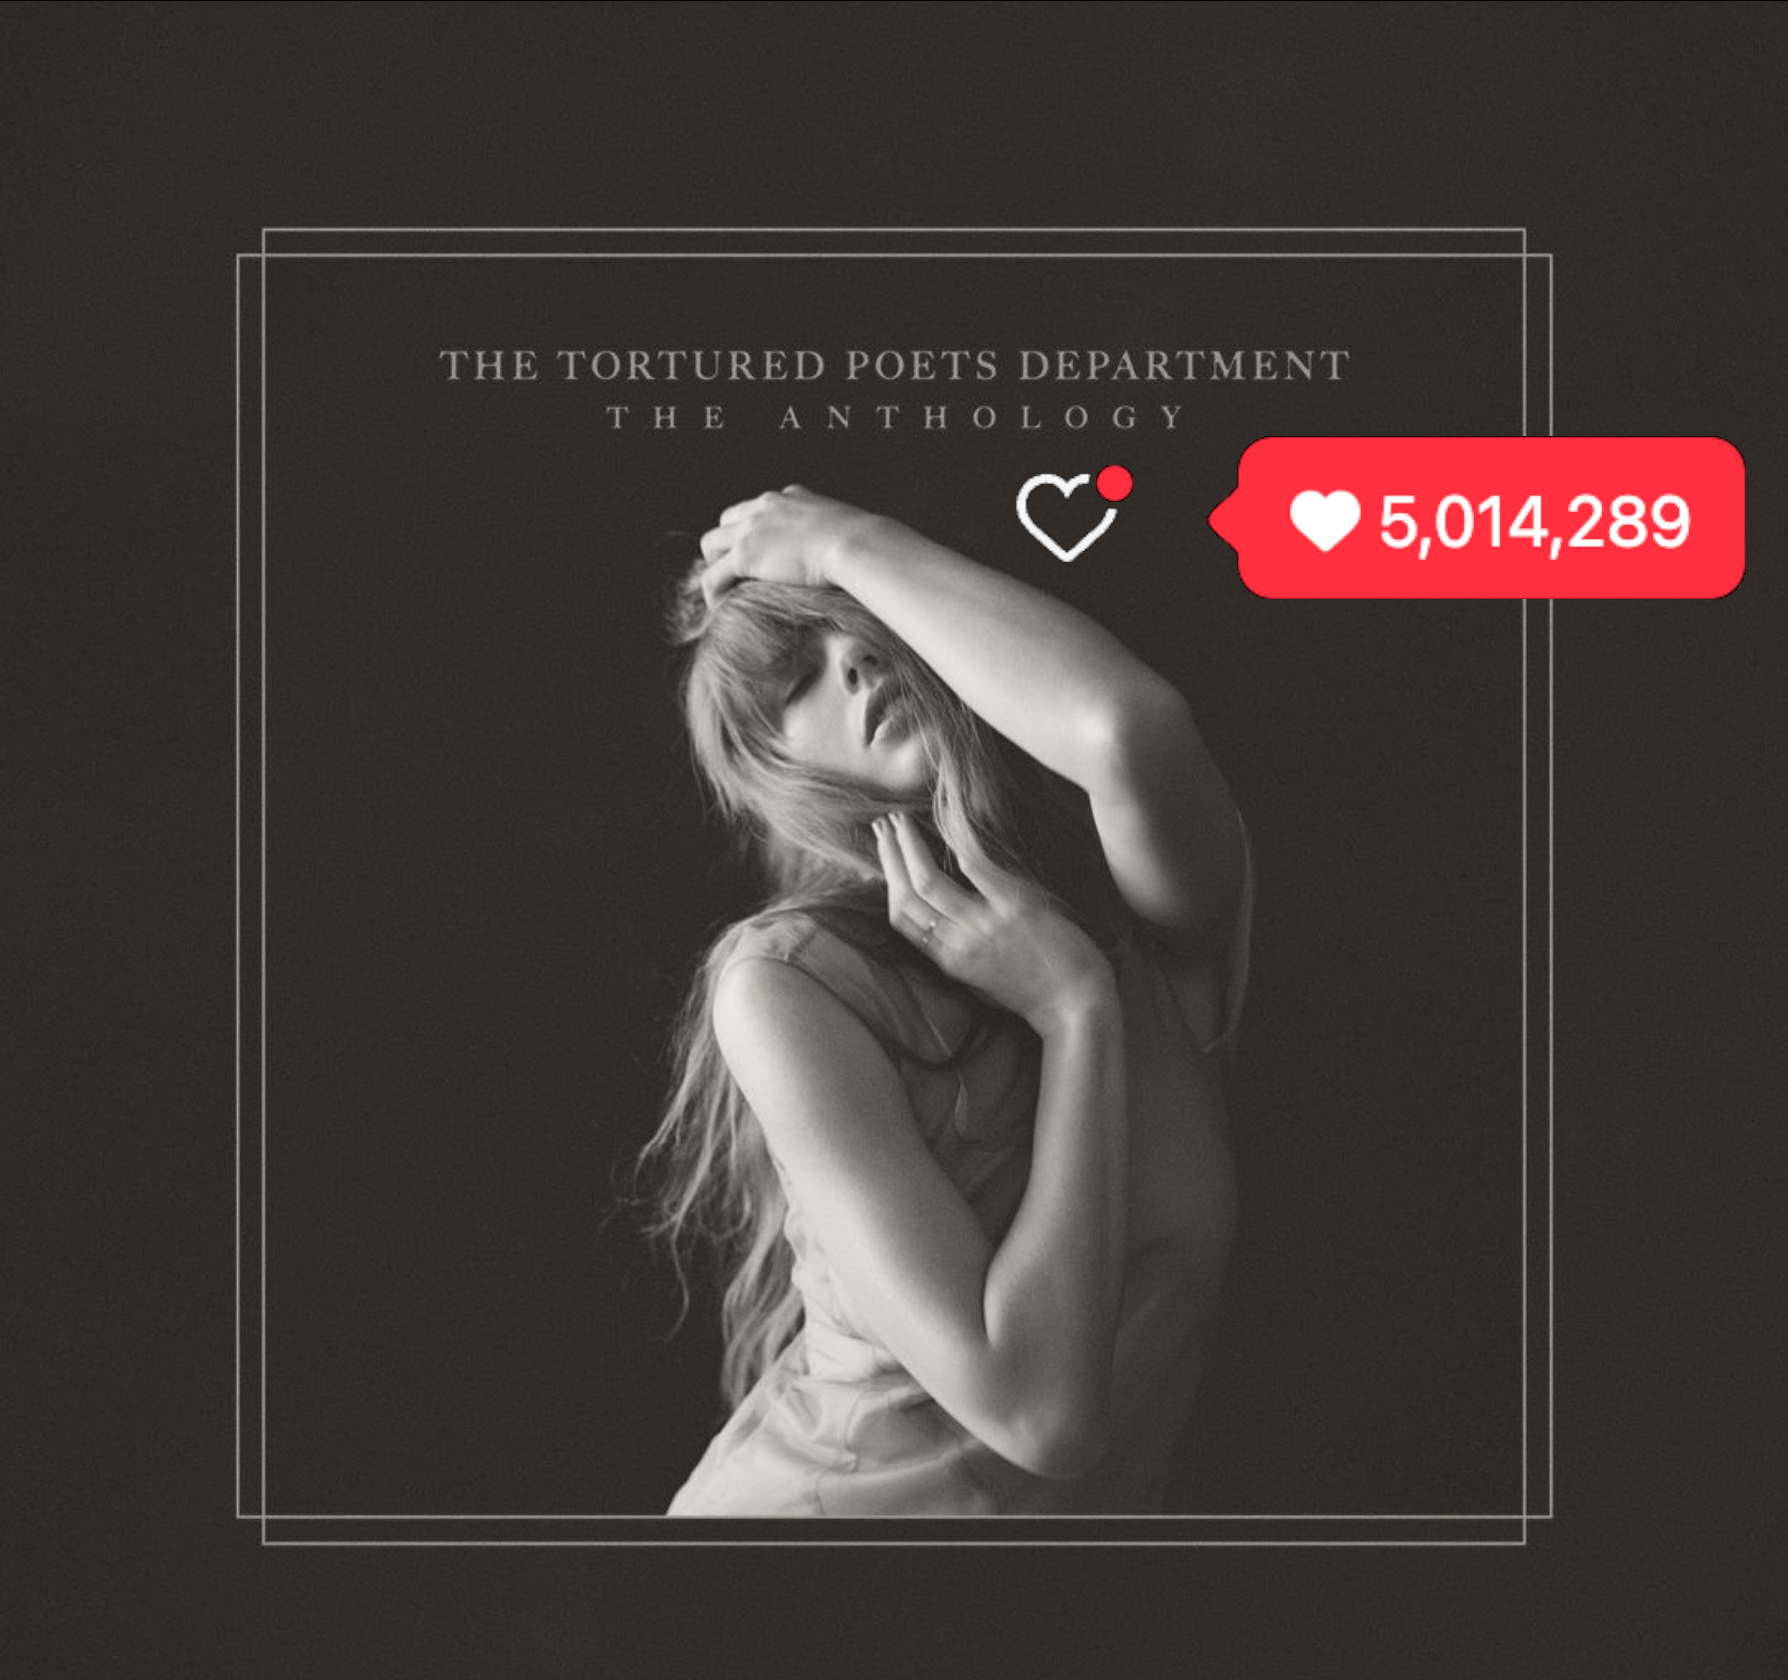 Image of Taylor Swift's album &quot;The Tortured Poets Department&quot; with a &quot;like&quot; heart showing over 5 million likes.